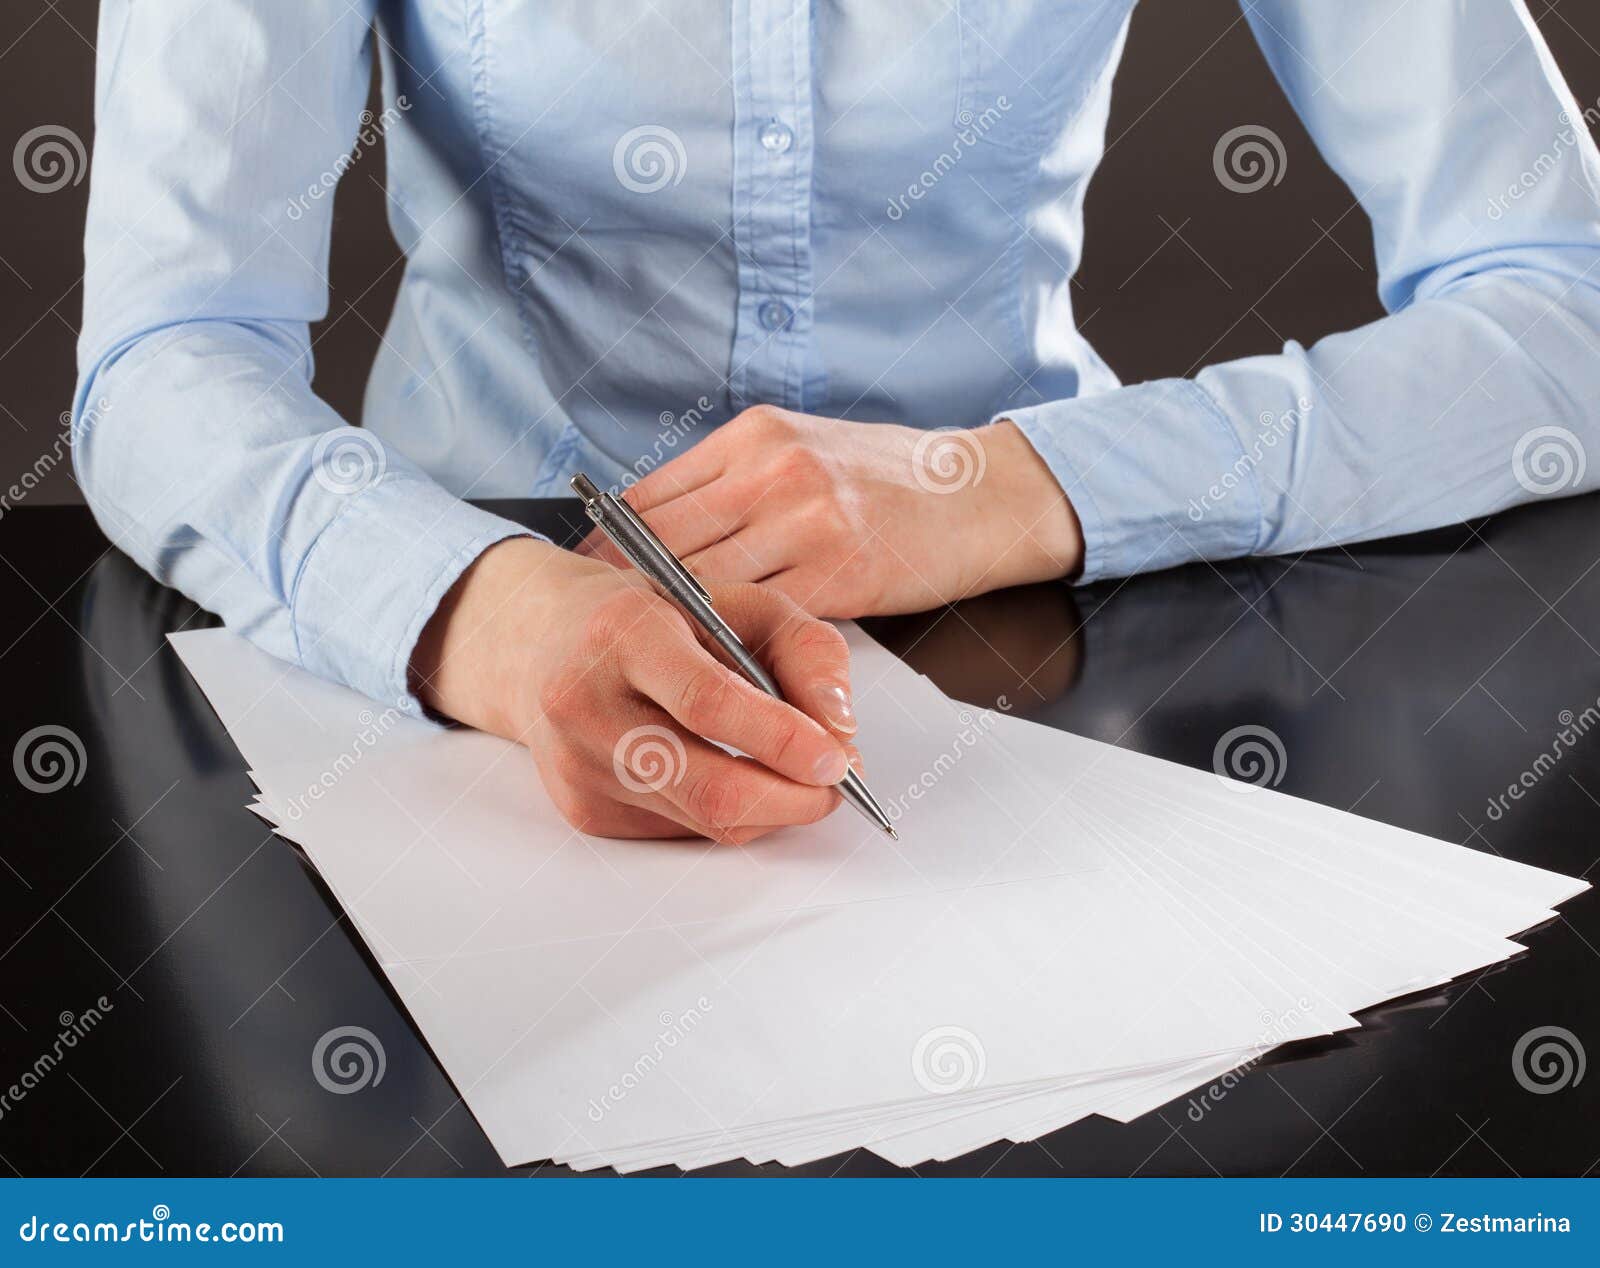 Businesswoman Writing Down Notes Stock Photo - Image of hold ...